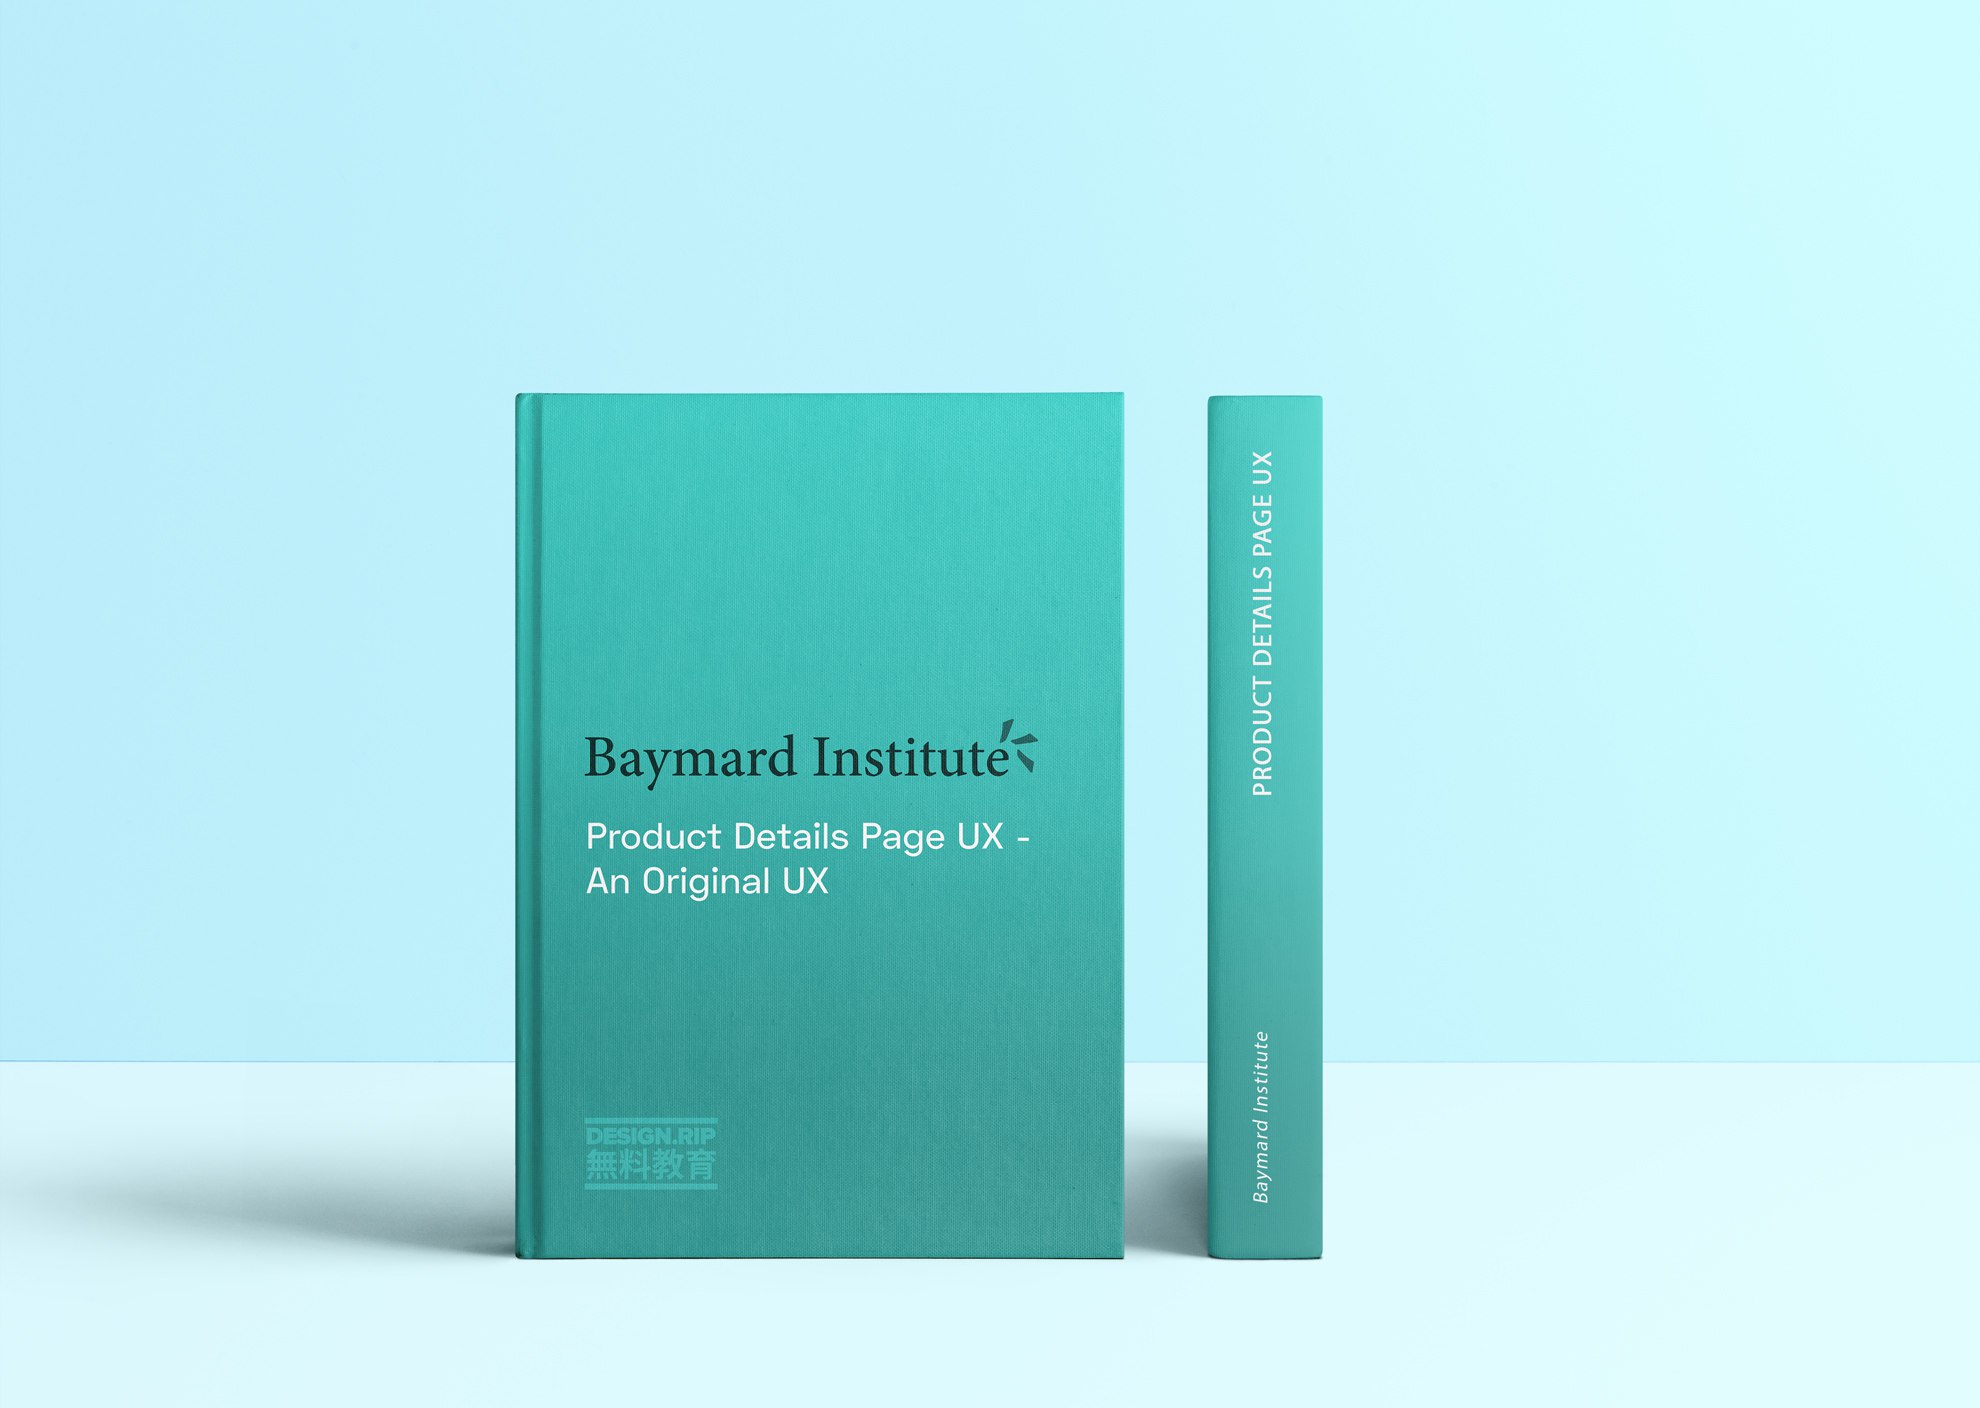 [VIP] Baymard Institute: Product Details Page UX - An Original UX Research Study